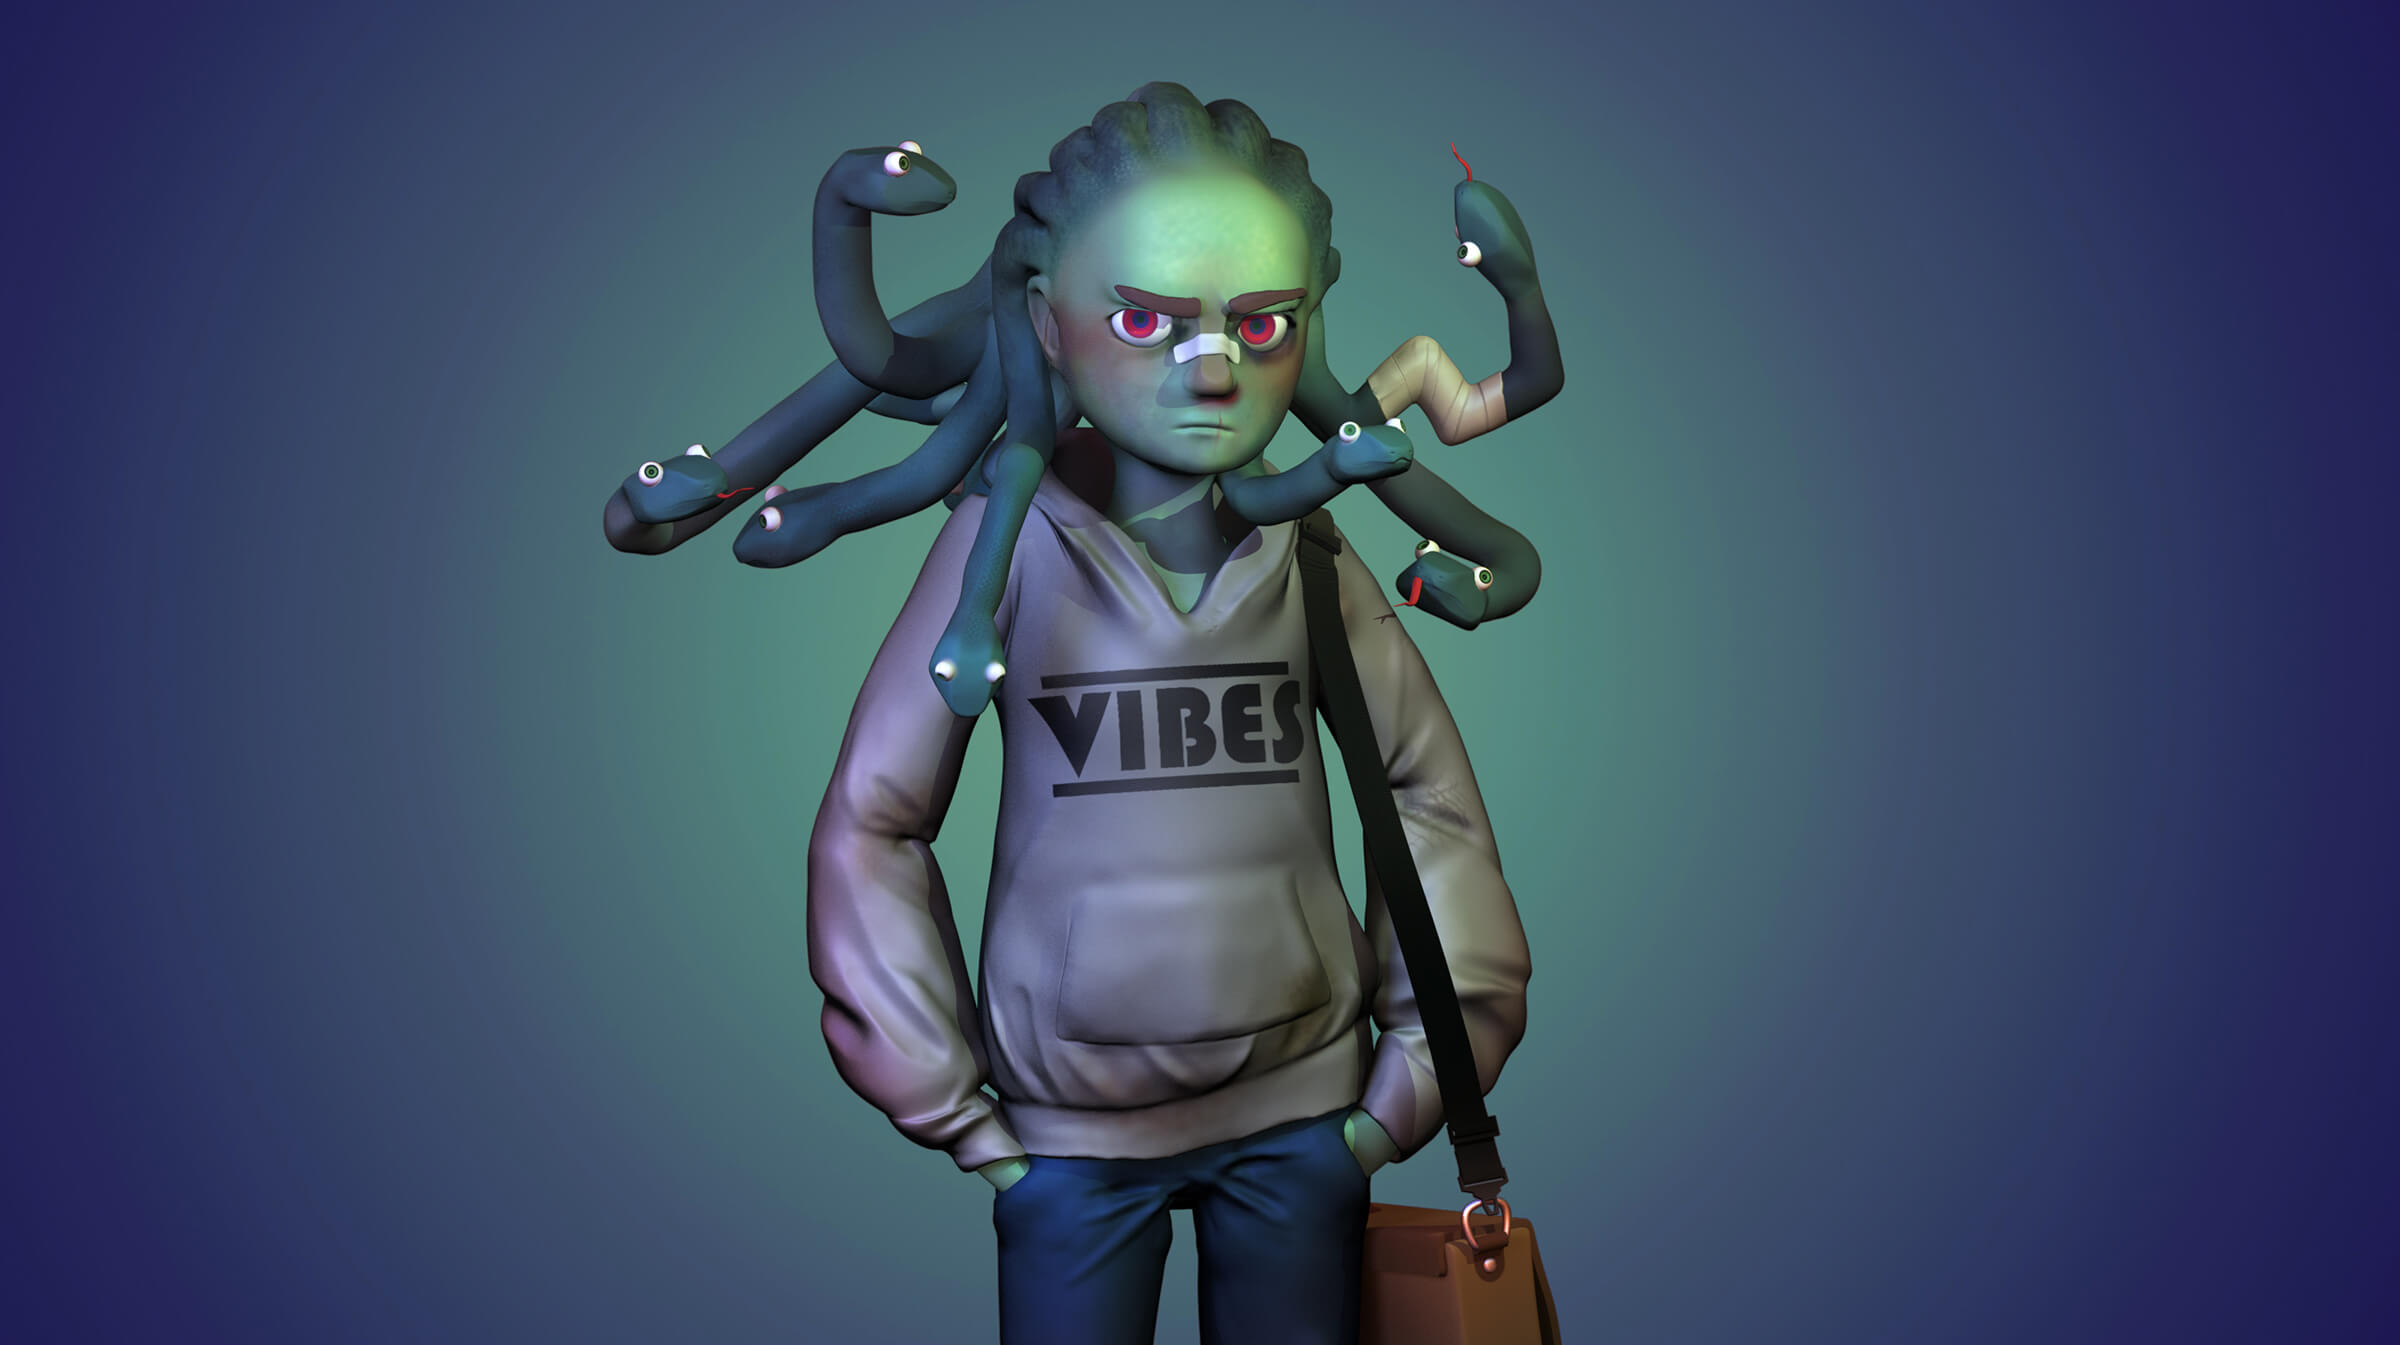 A character with snakes for hair wearing a sweatshirt and jeans